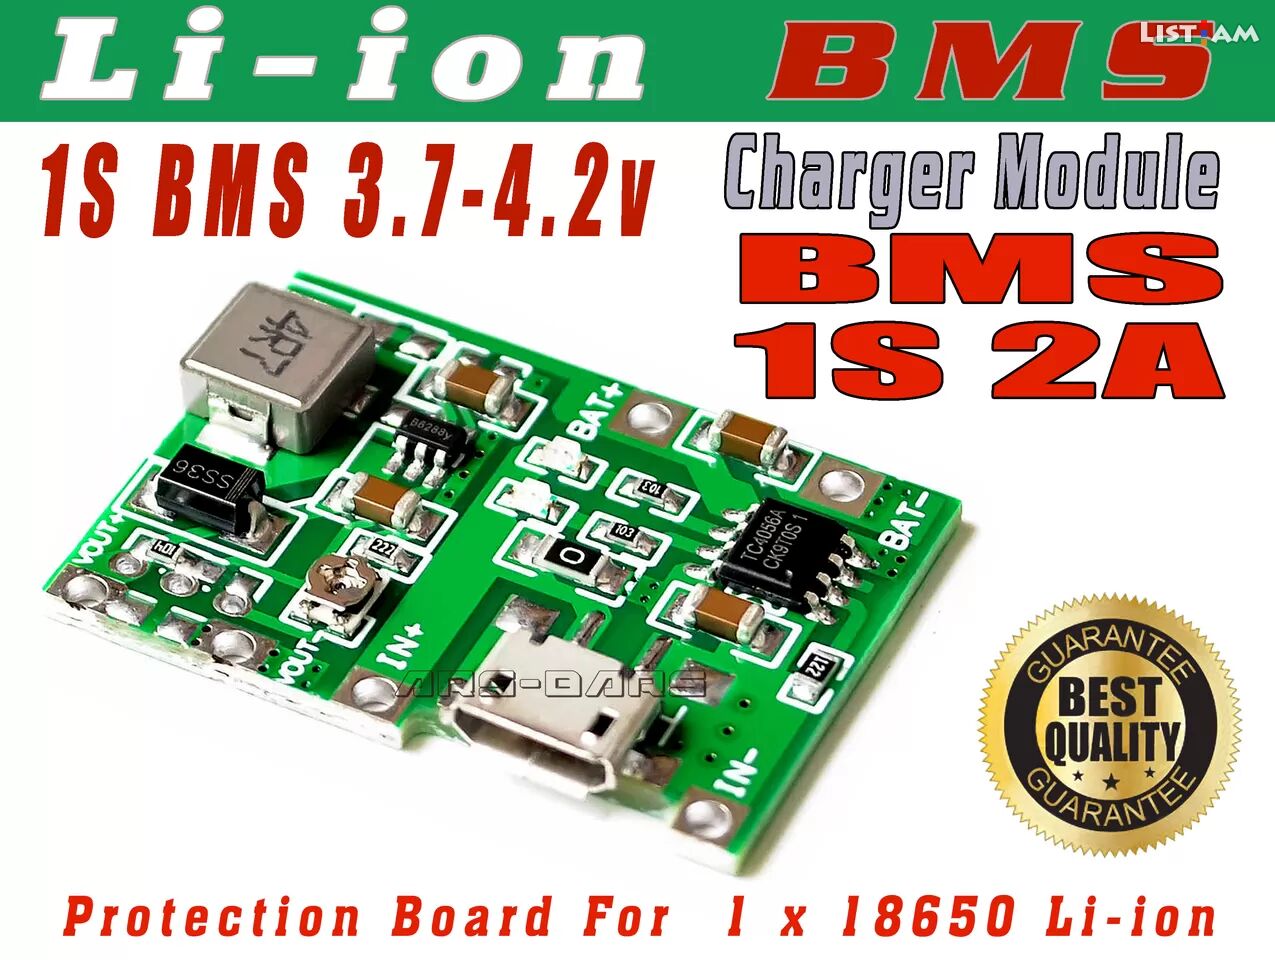 Charger Module for